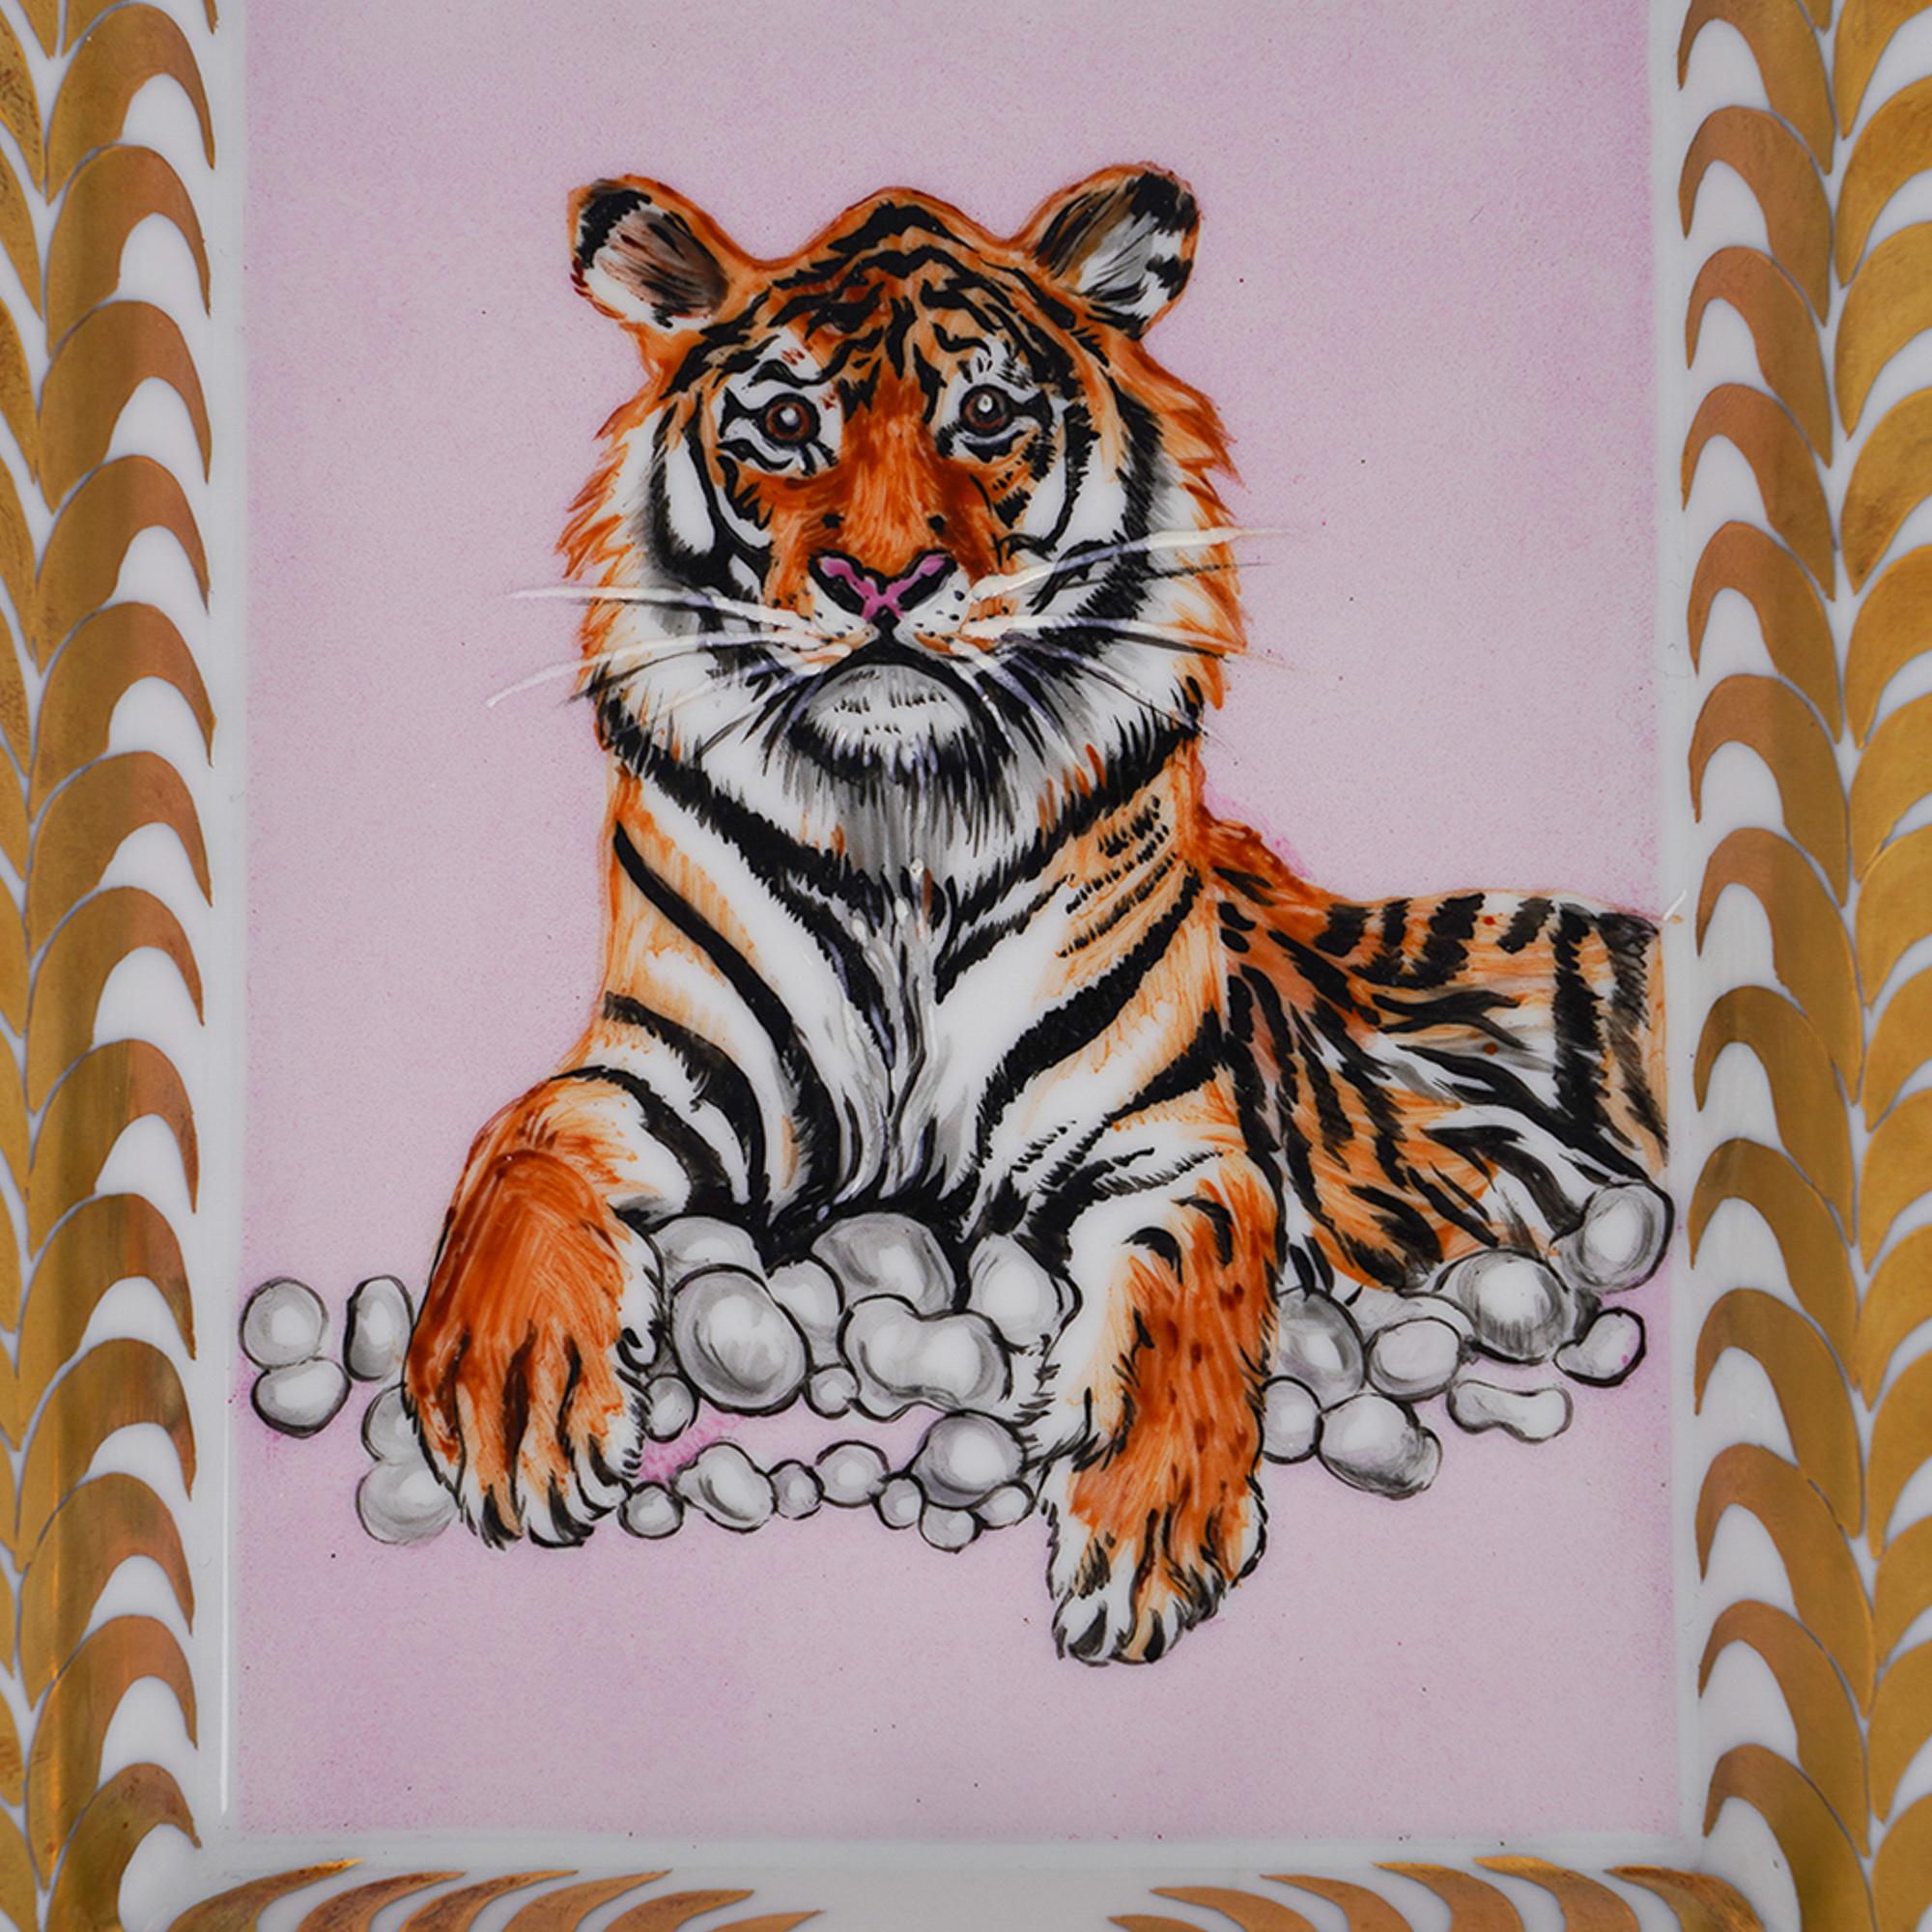 Mightychic offers an Hermes Tigre Royal featured in Gold (Or) and Rose ashtray.
Hand-painted Limoges Porcelain.
This magnificent regal tiger is a collectors treasure.
A decorative ashtray or tray piece perfect for any room.
Protected by velvet